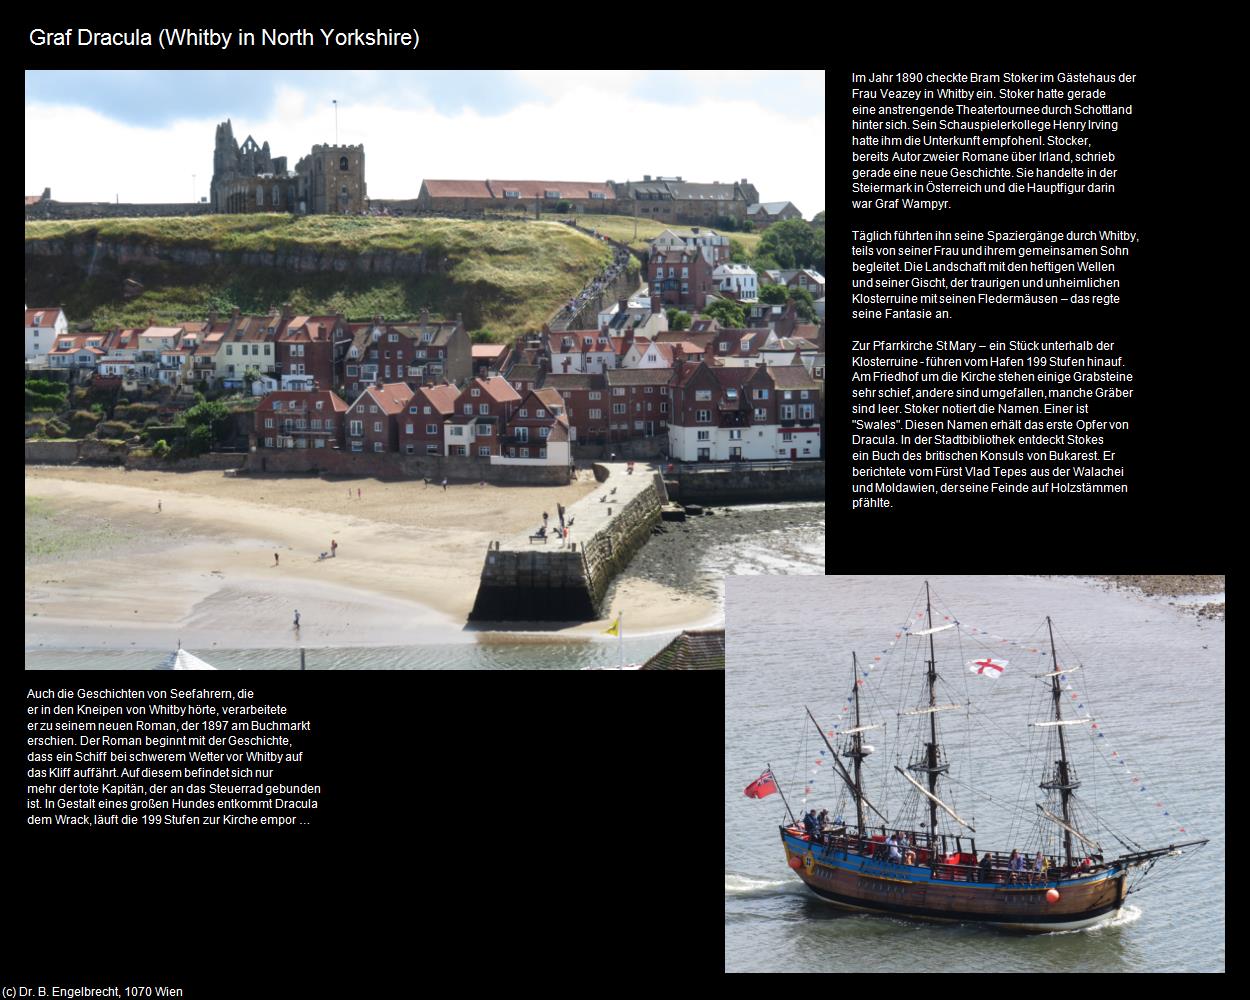 Graf Dracula  (Whitby in North Yorkshire, England  ) in Kulturatlas-ENGLAND und WALES